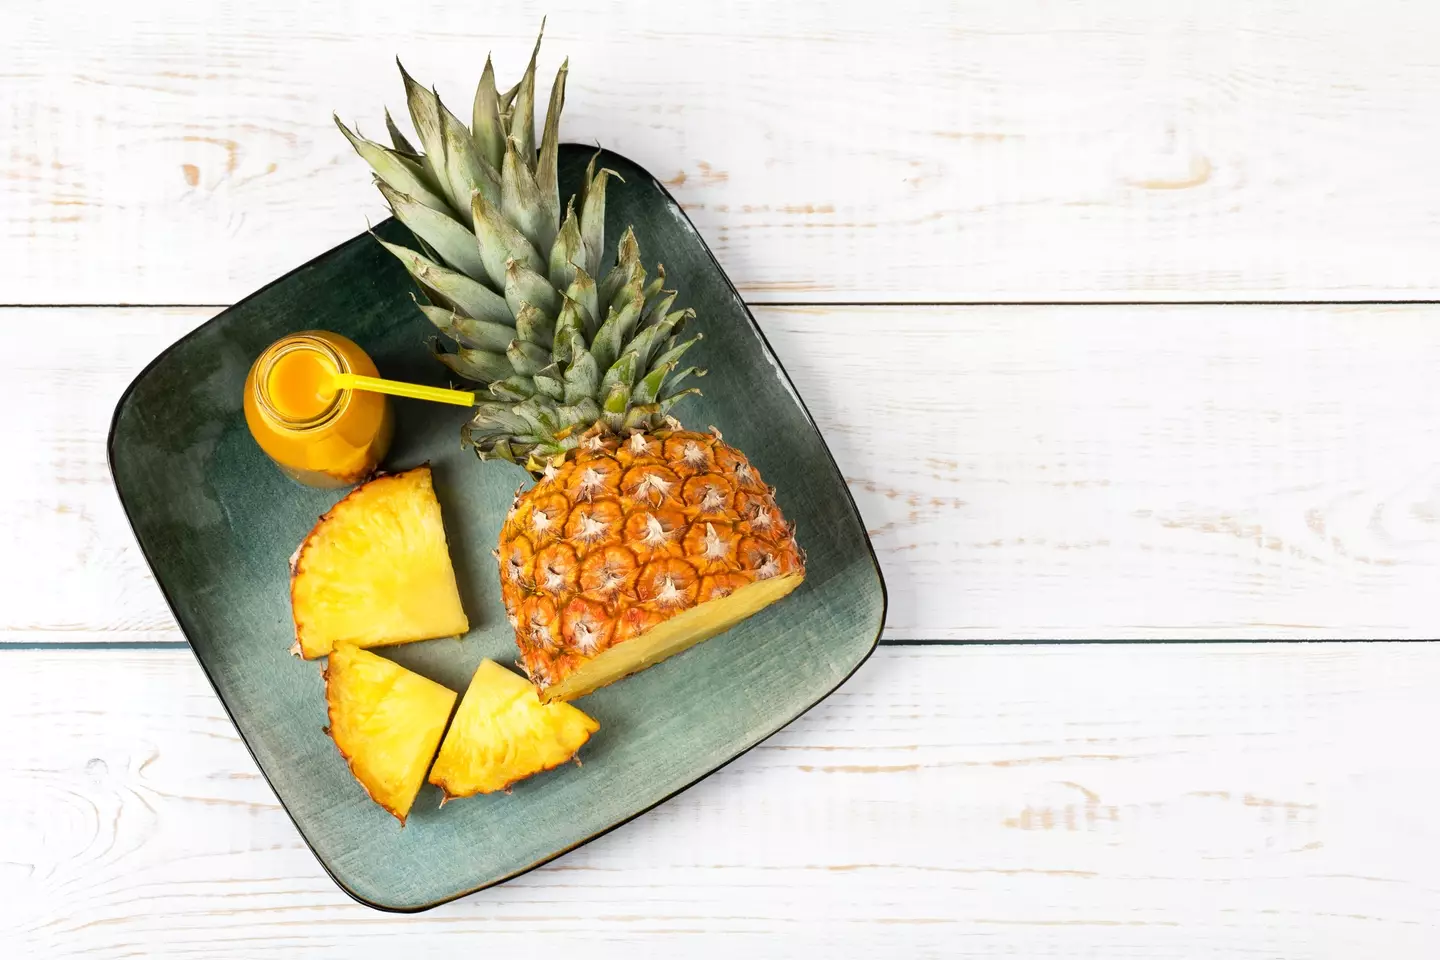 There's a pretty harrowing reason why pineapple tingles your tongue so much.